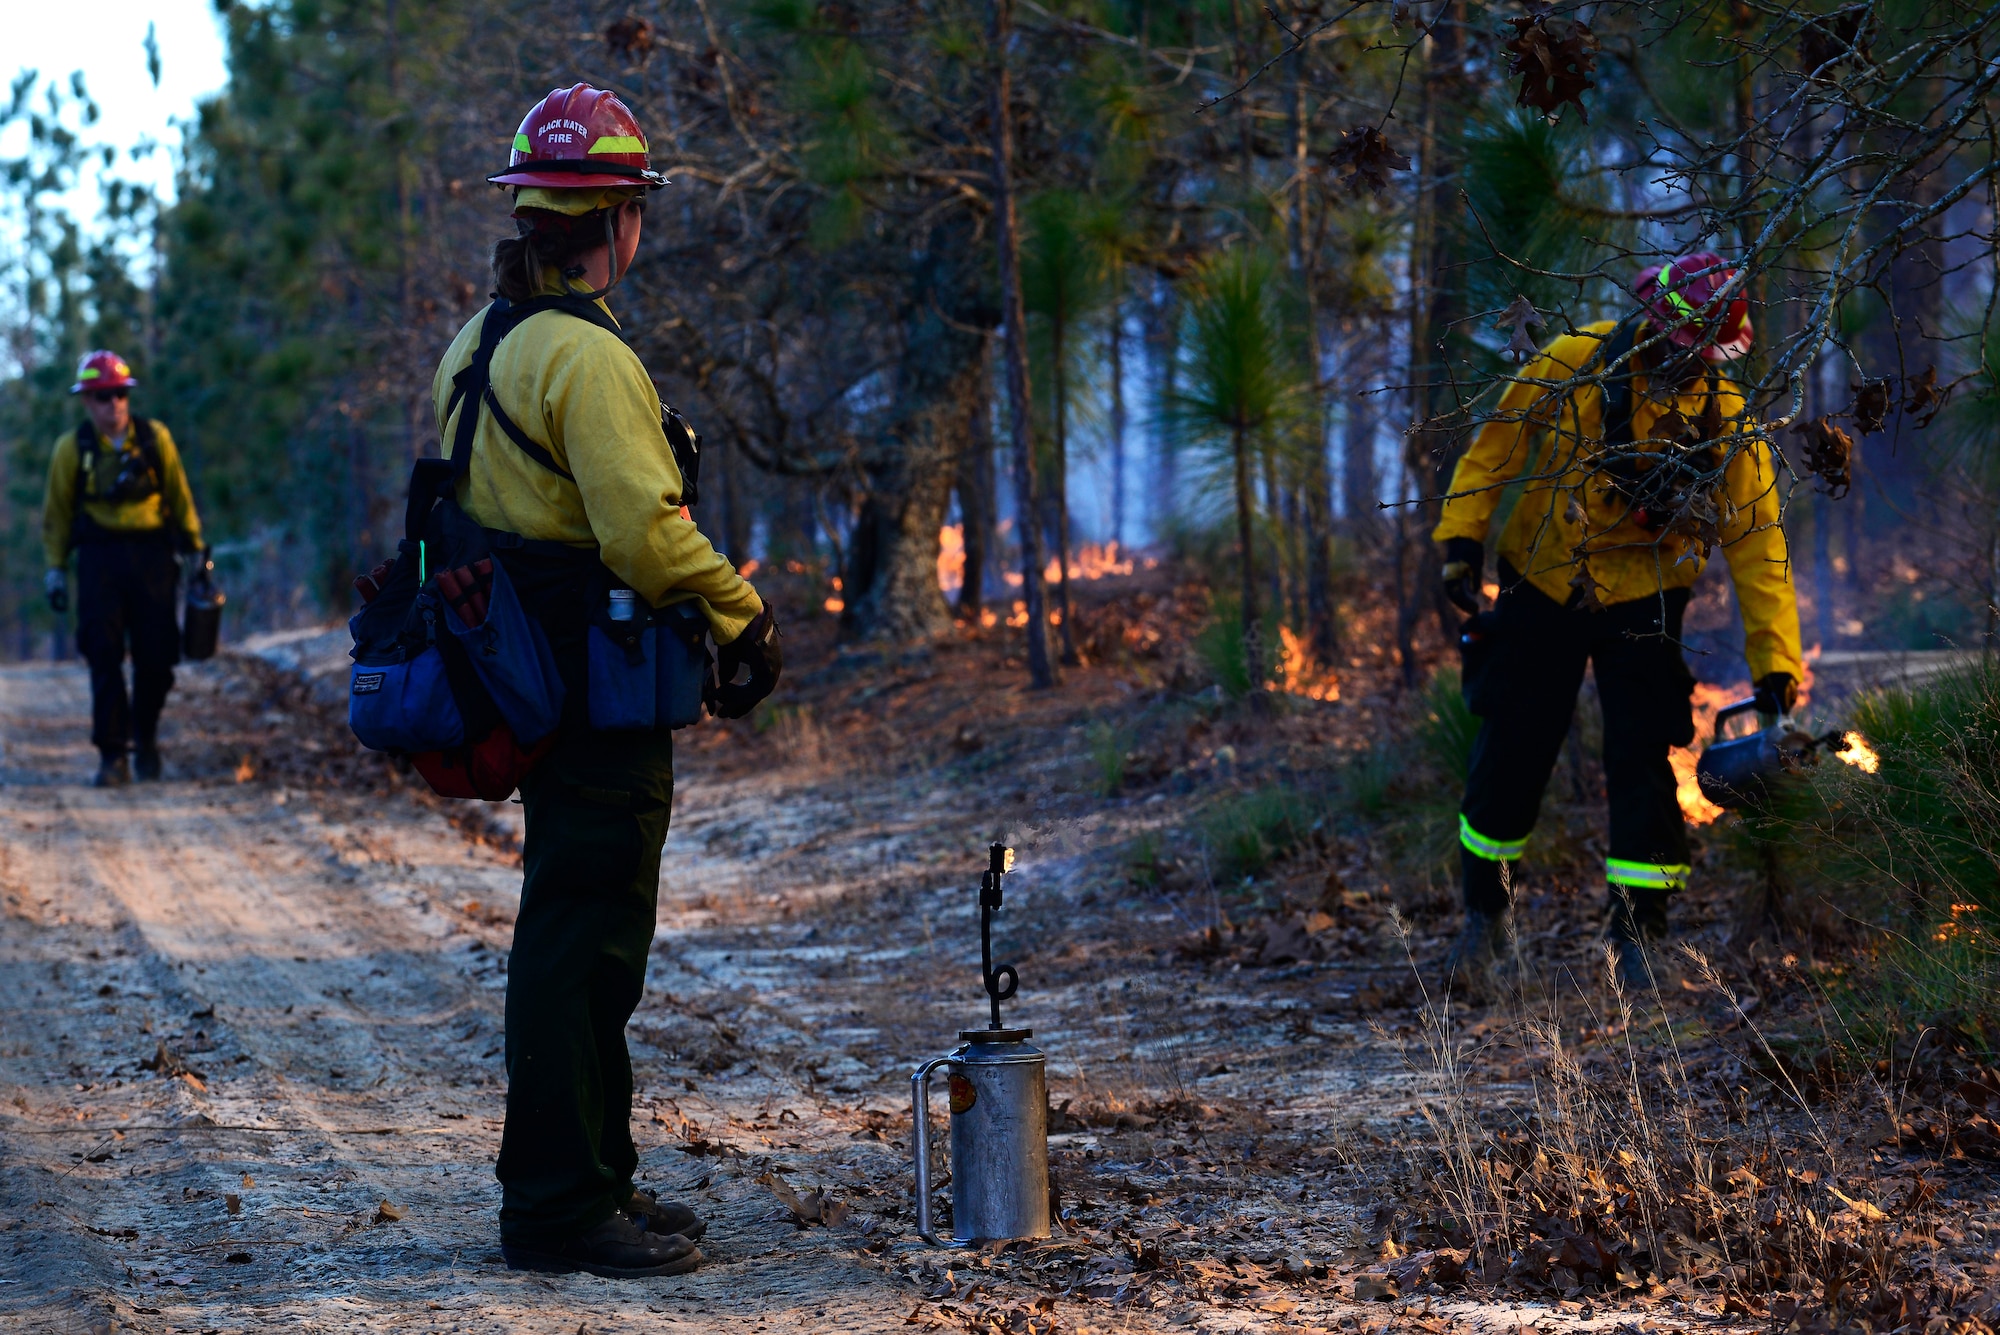 Members of the prescribe burn team light fires on the forest floor during prescribed burning at Poinsett Electronic Combat Range, Sumter, S.C., Jan. 28, 2015. The team was scheduled to burn throughout the week while the weather permitted. (U.S. Air Force photo by Airman 1st Class Diana M. Cossaboom/Released) 